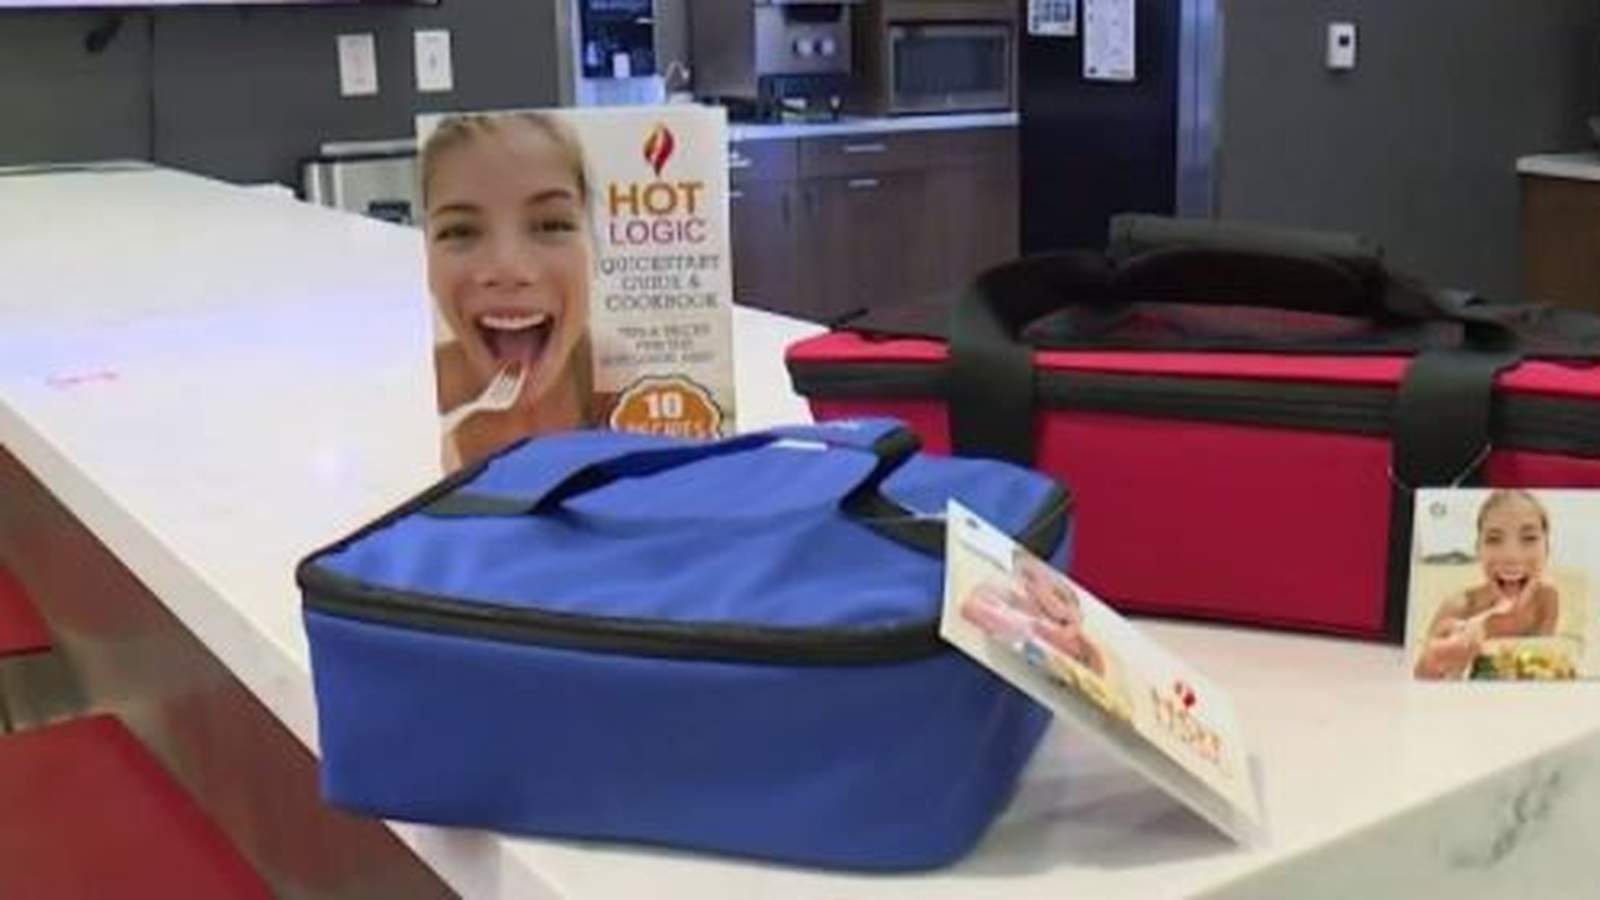 Test it Tuesday: Can this mini lunch bag called a ‘Hot Logic Personal Oven’ also cook your food?